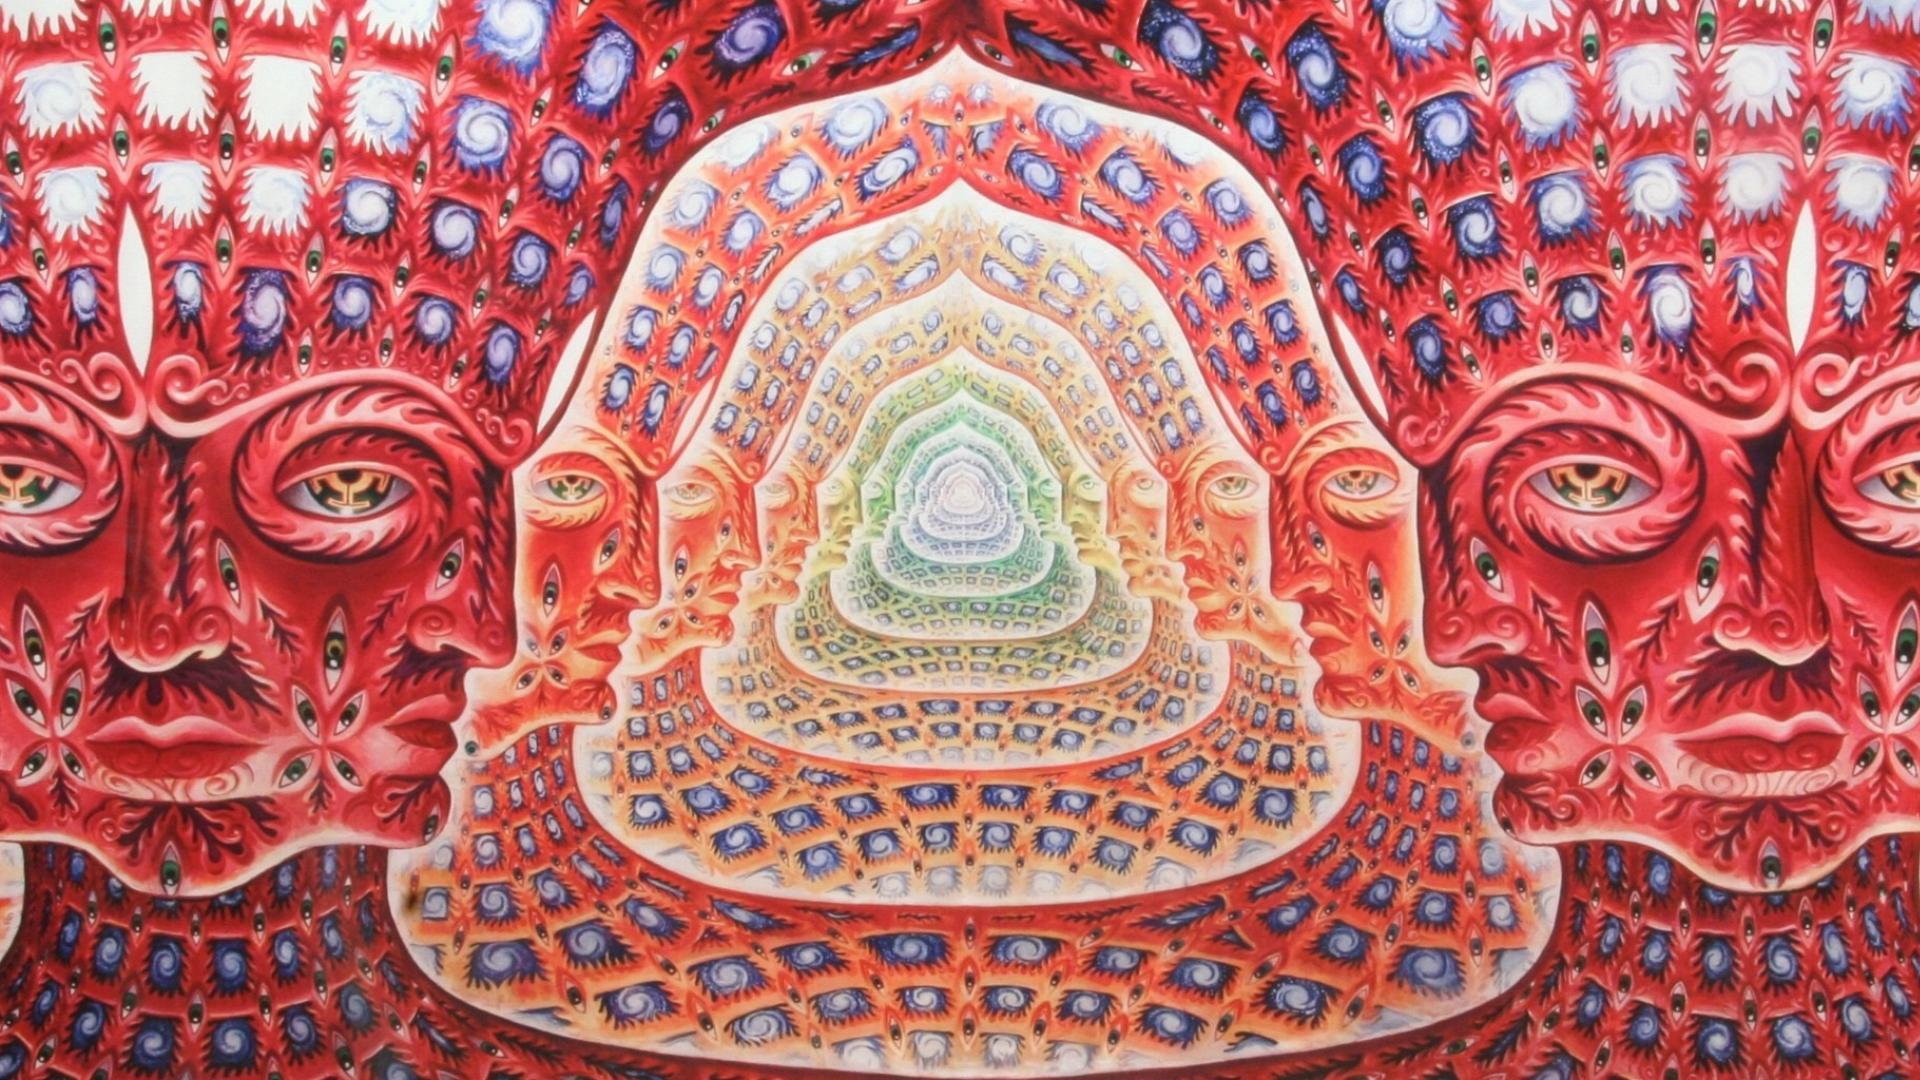 Tool Psychedelic Artwork Alex Grey Faces Panoramic 1920x1080 61316 